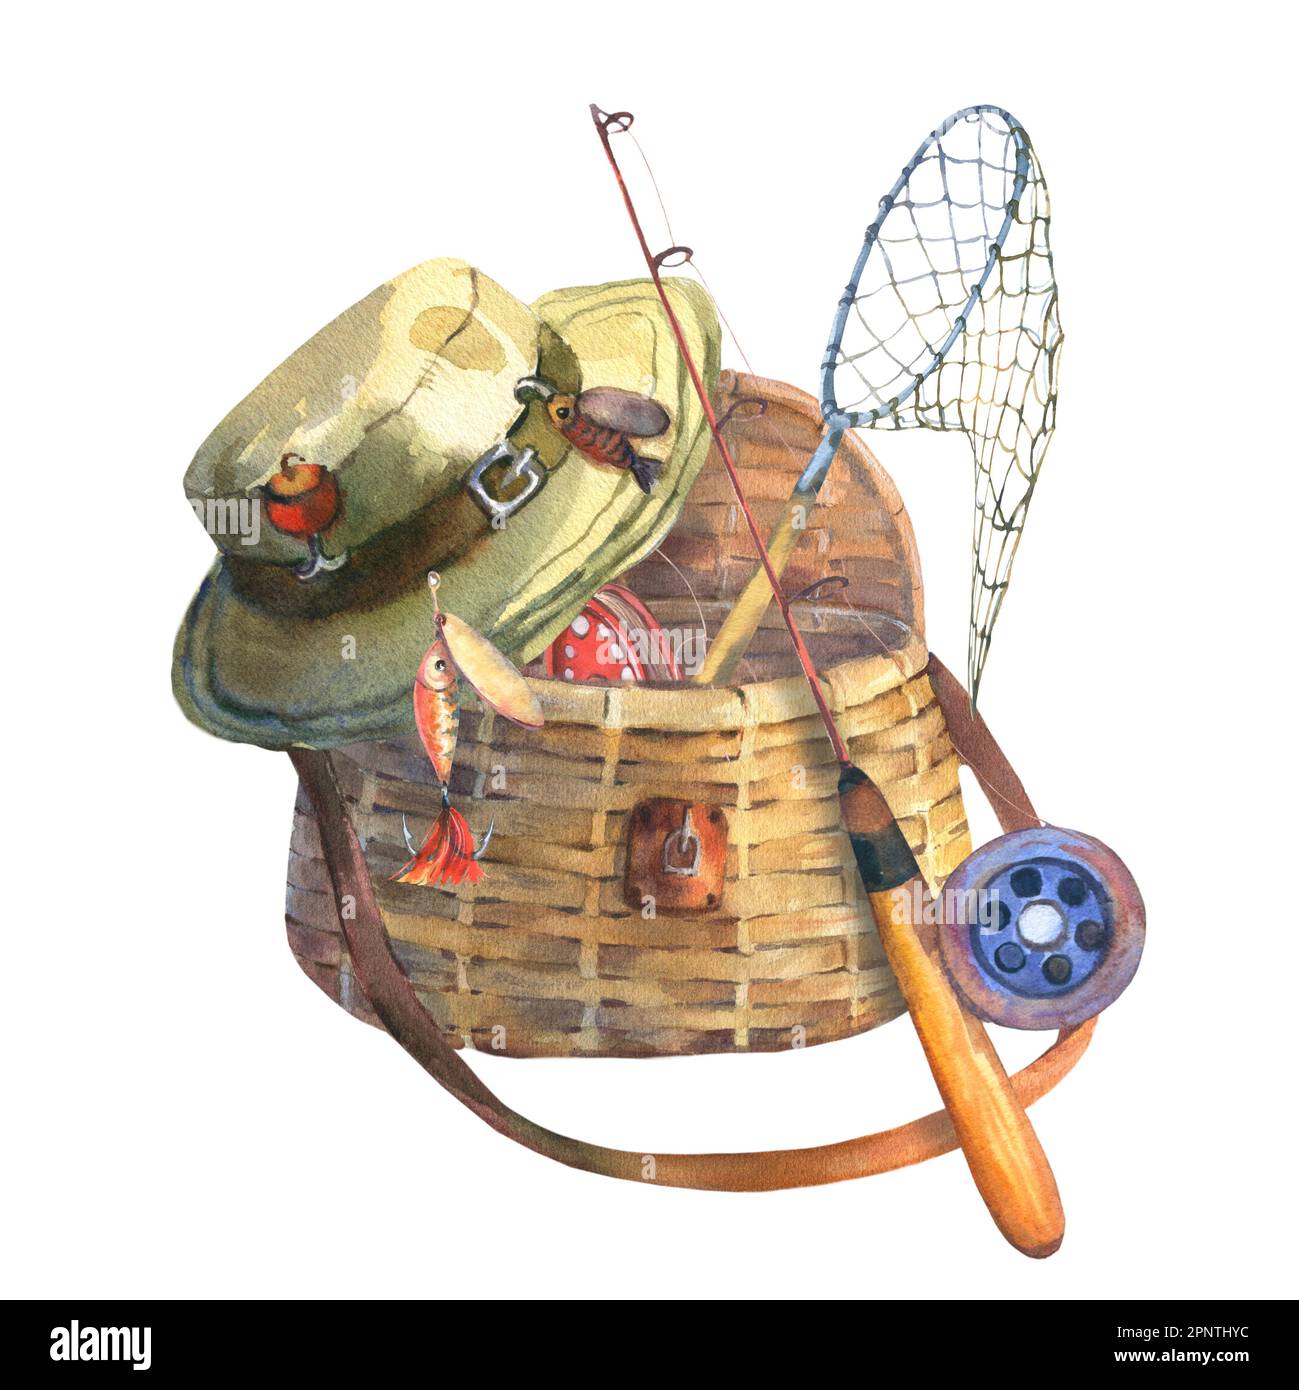 https://c8.alamy.com/comp/2PNTHYC/watercolor-composition-with-fishing-bag-fishing-rod-hat-net-and-fishing-tackle-isolated-on-a-white-background-cut-out-clip-art-element-for-2PNTHYC.jpg